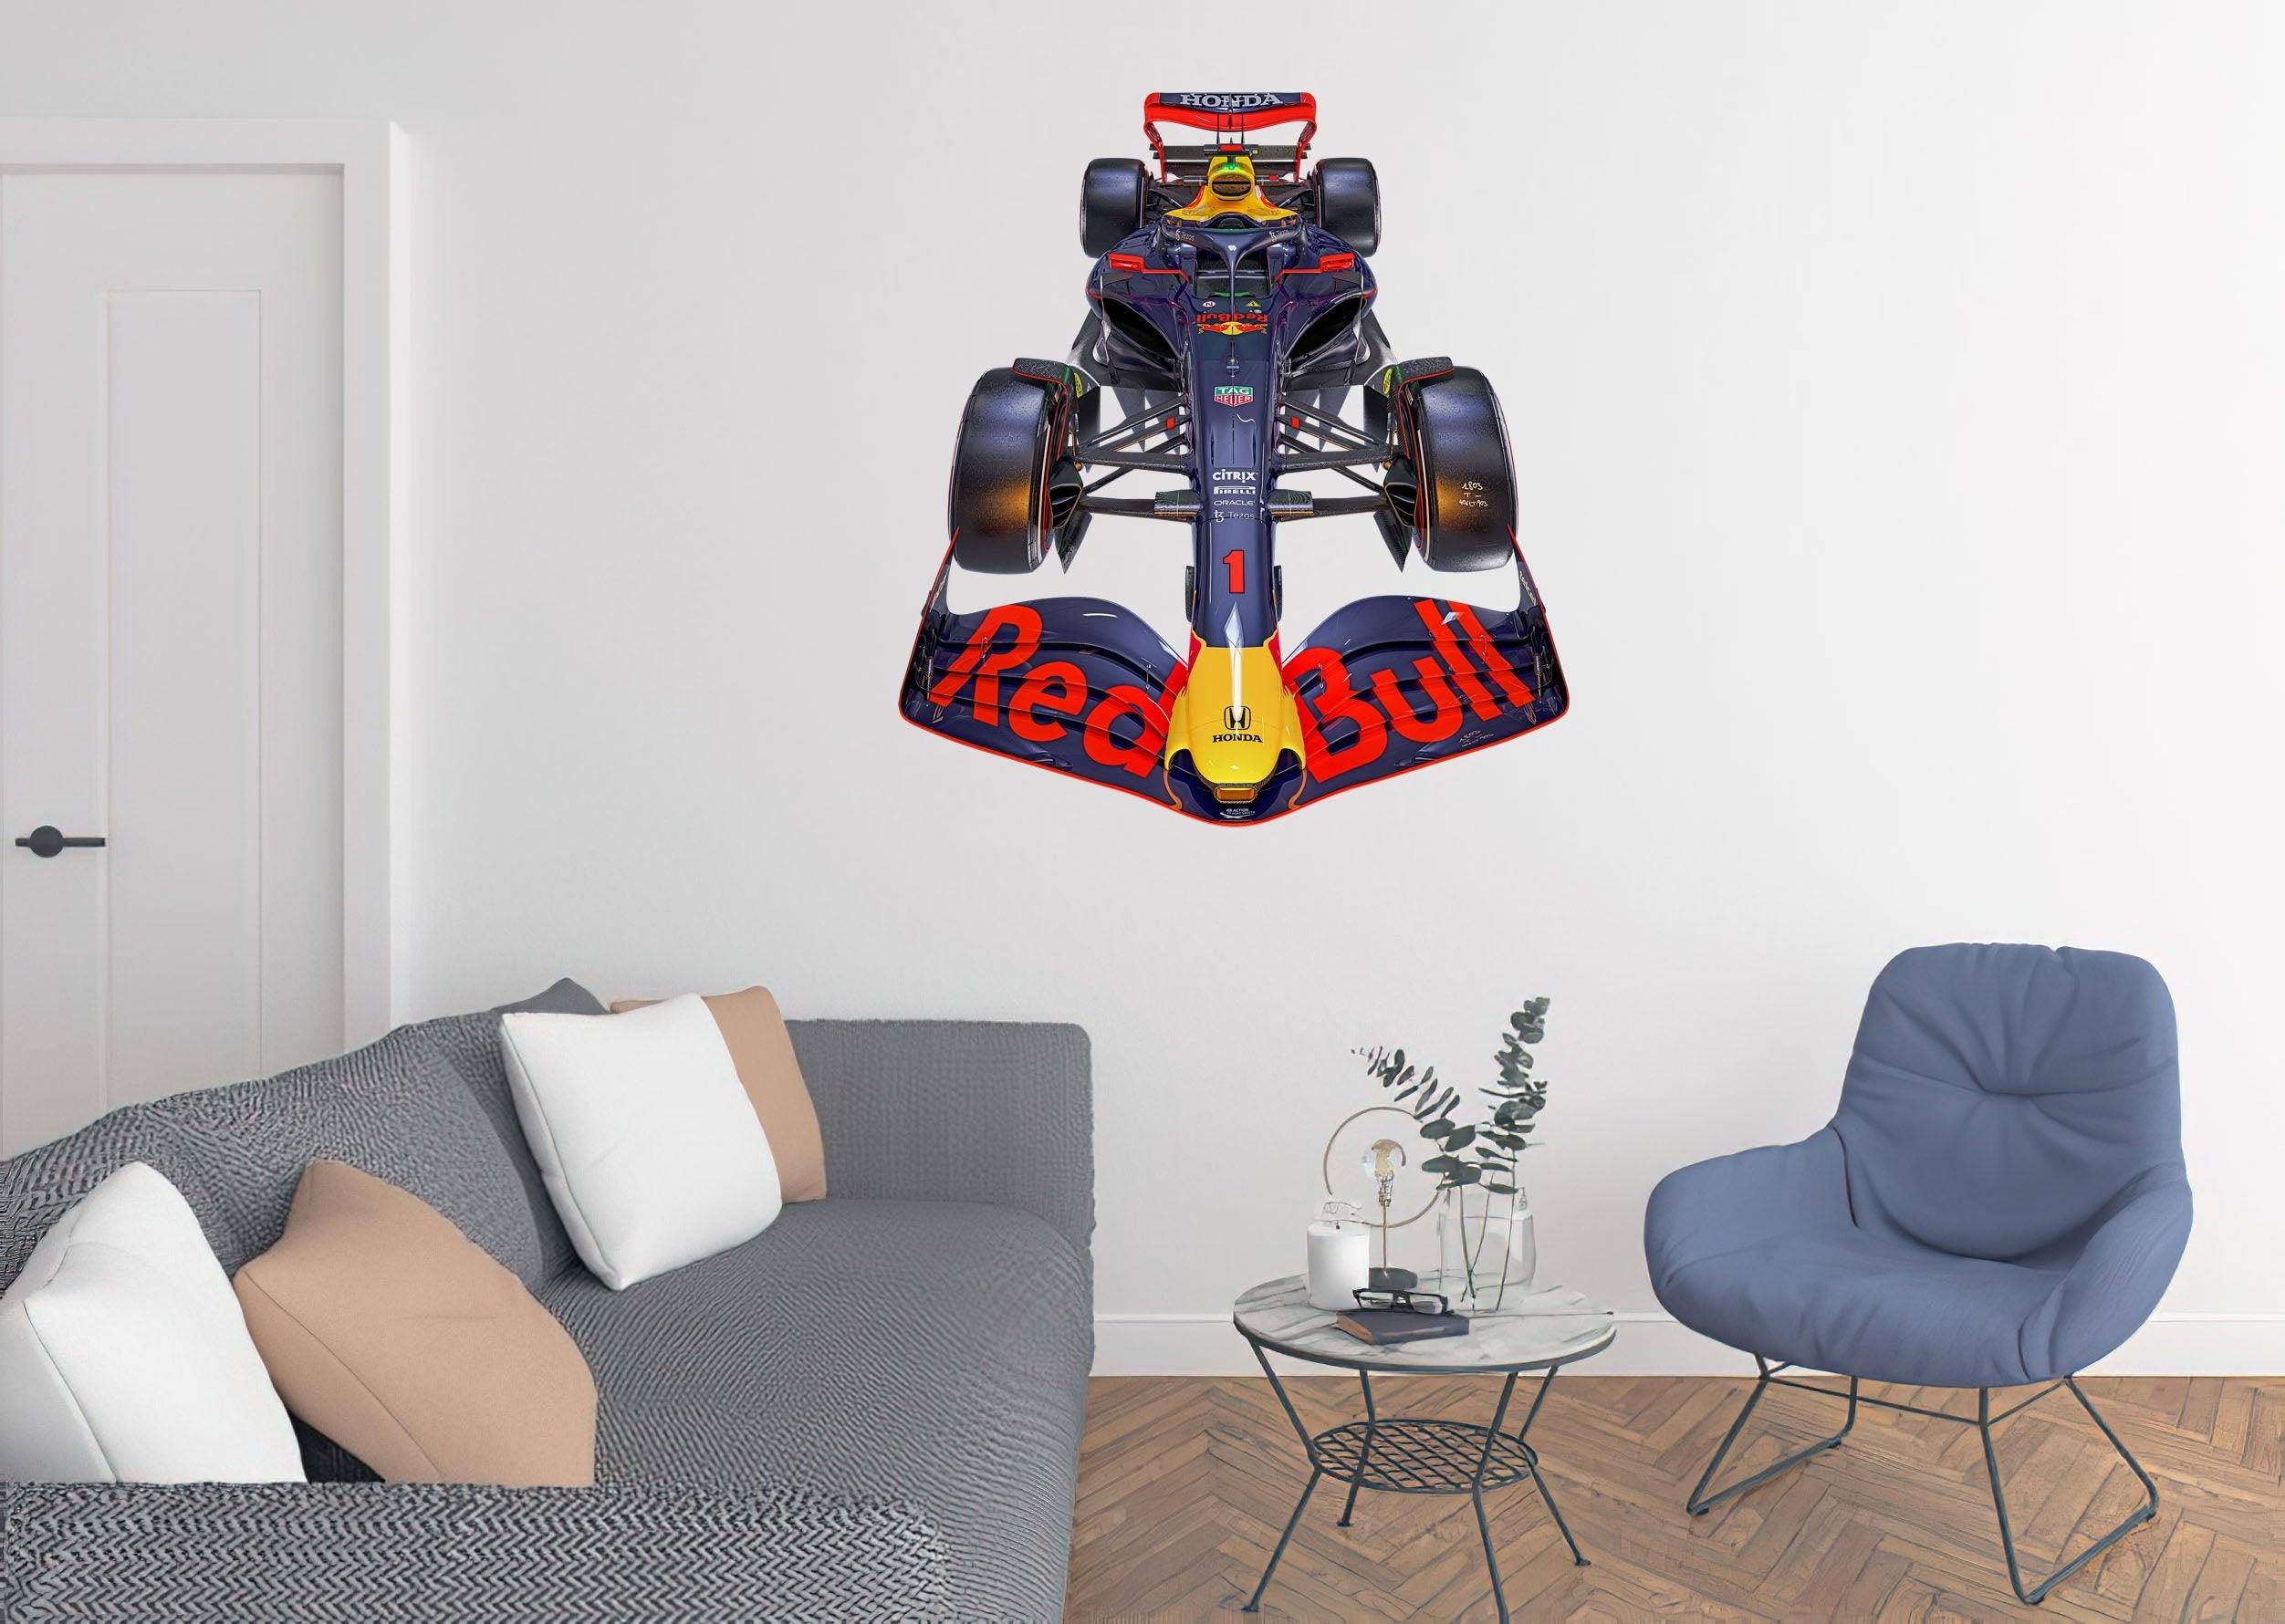 RB18 2022 F1 Red Bull Wall Front Decal Sticker Max Verstappen Car 019, wall sticker